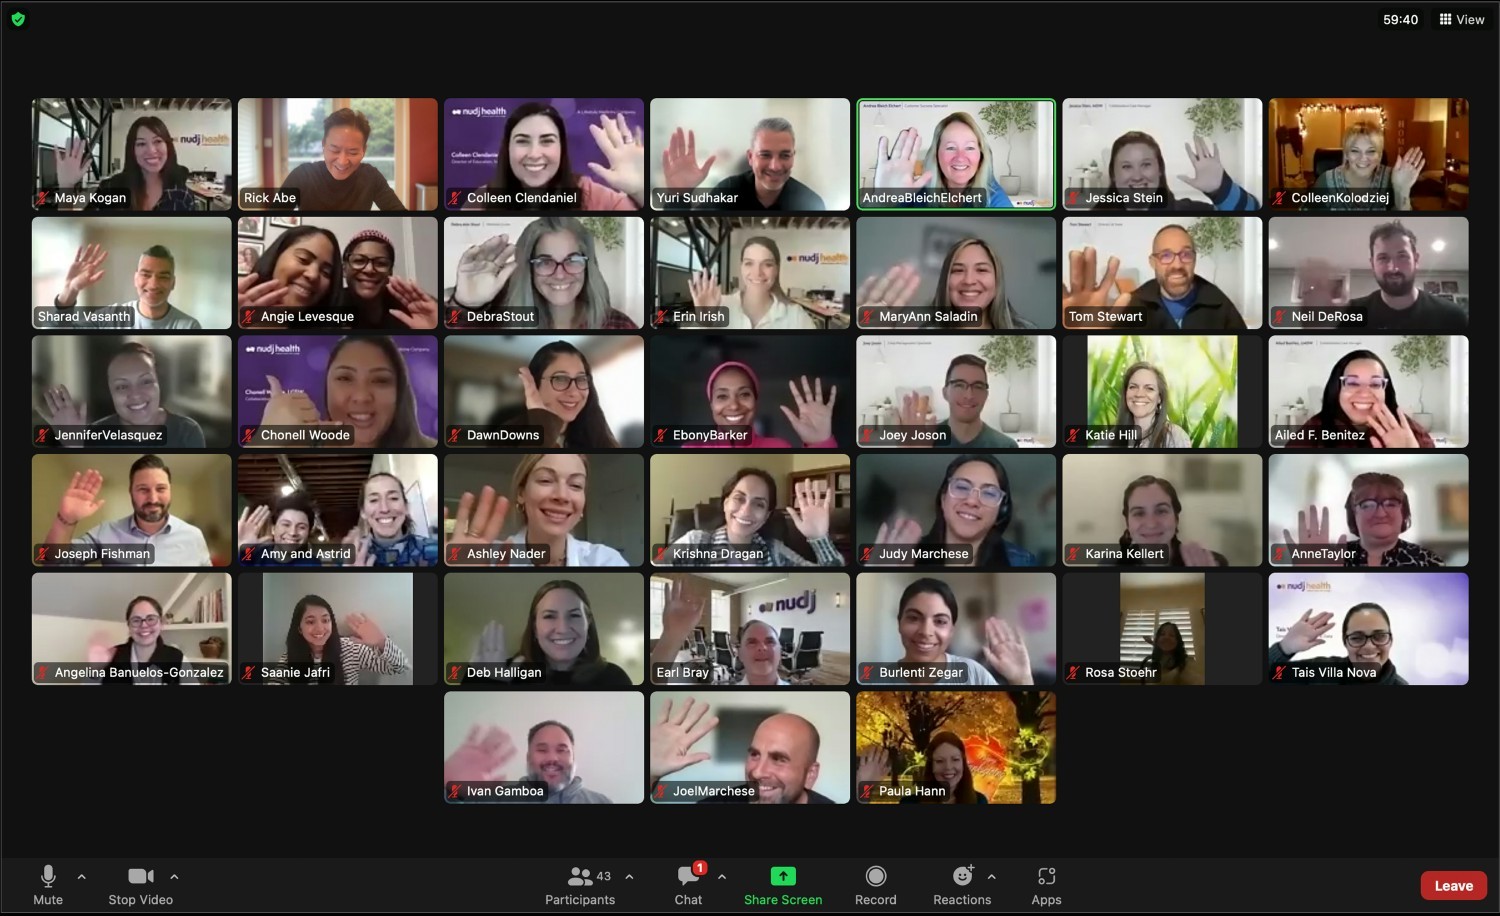 Since we are a fully remote company with employees all across the country, our company meetings are virtual via Zoom.